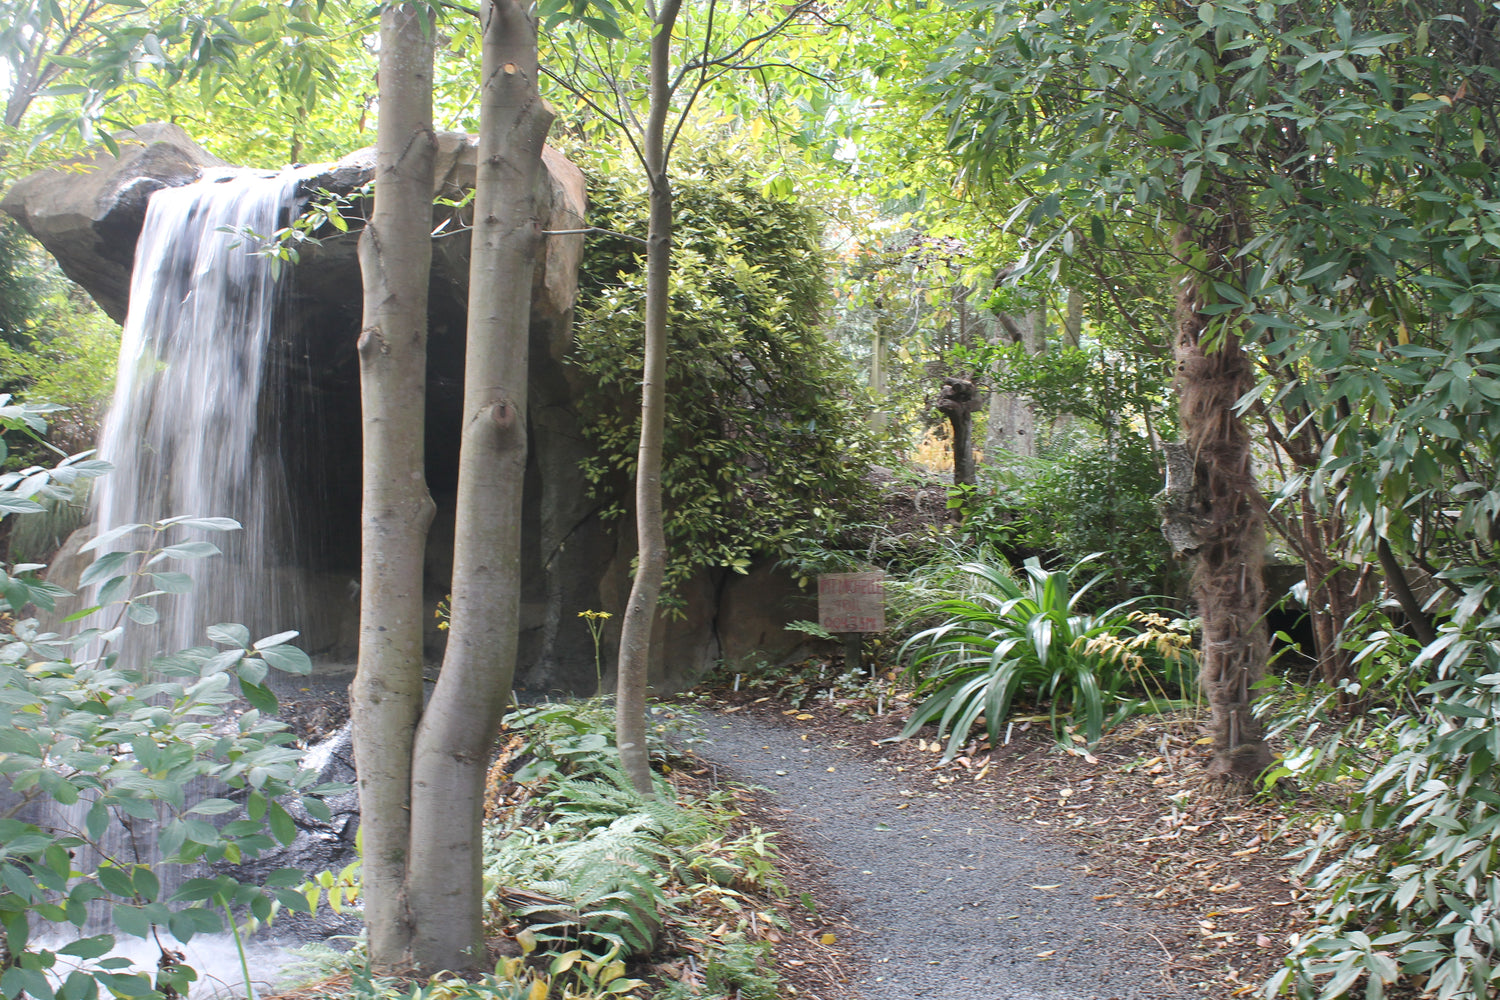 A view of the path to the Mt. Michelle waterfall surrounded by various plants